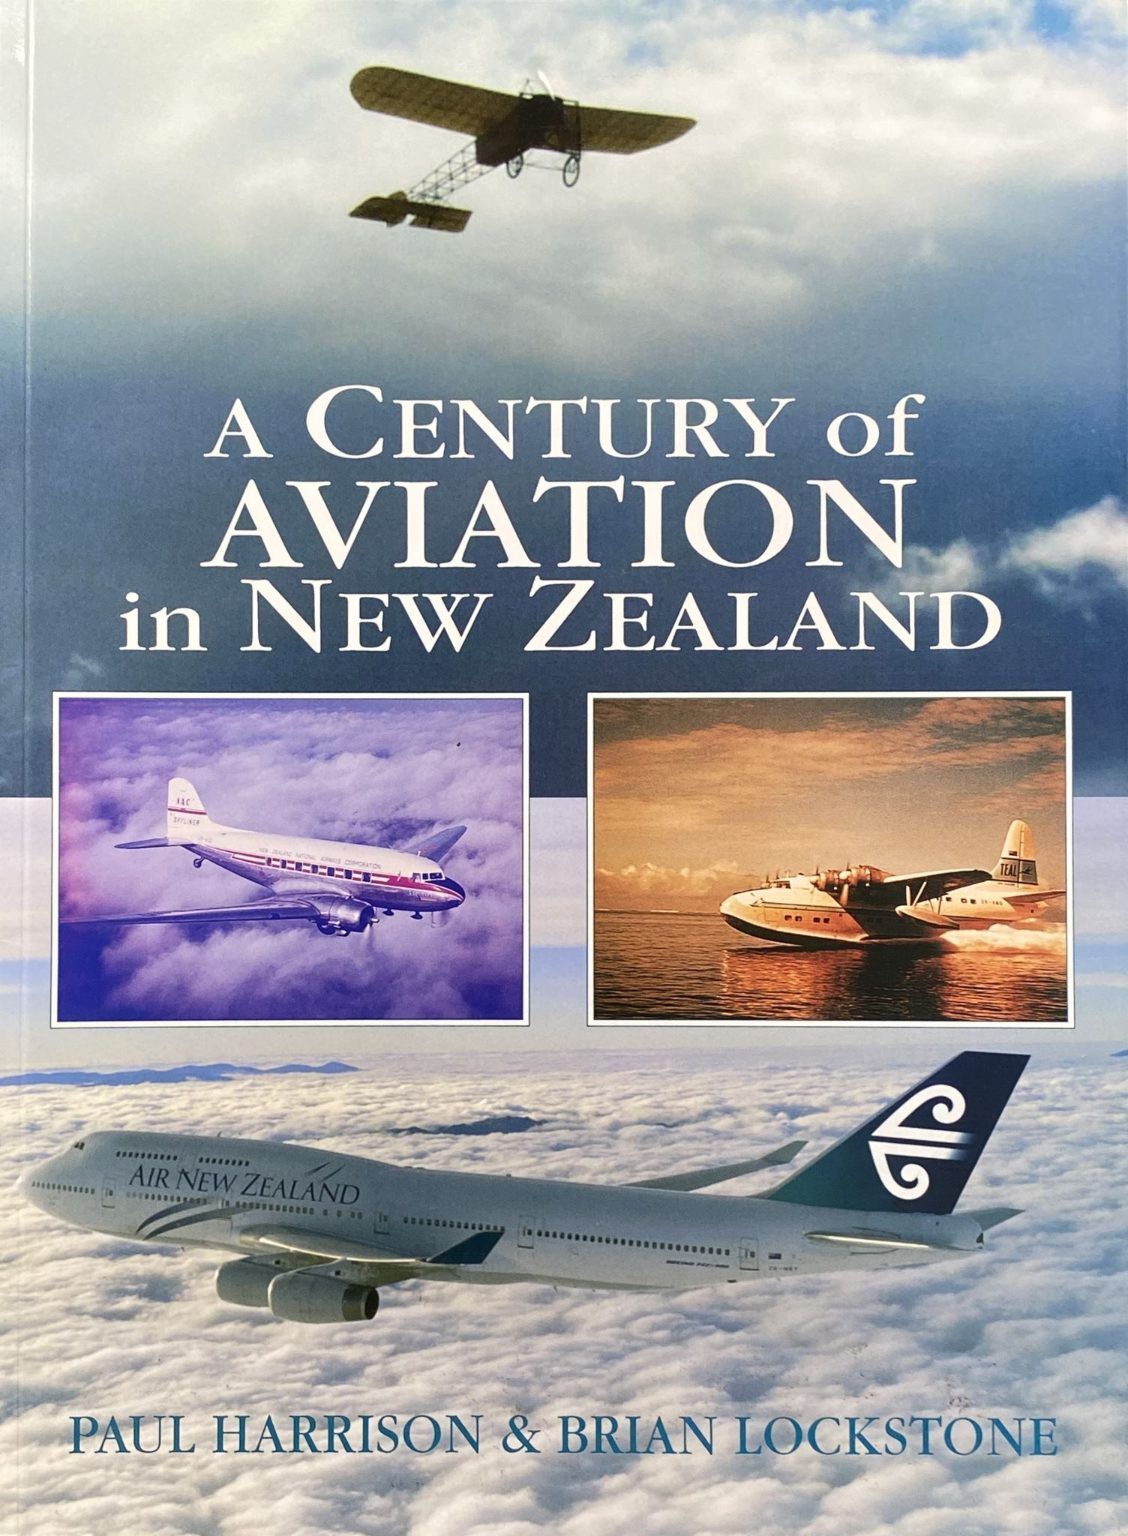 A CENTURY OF AVIATION IN NEW ZEALAND